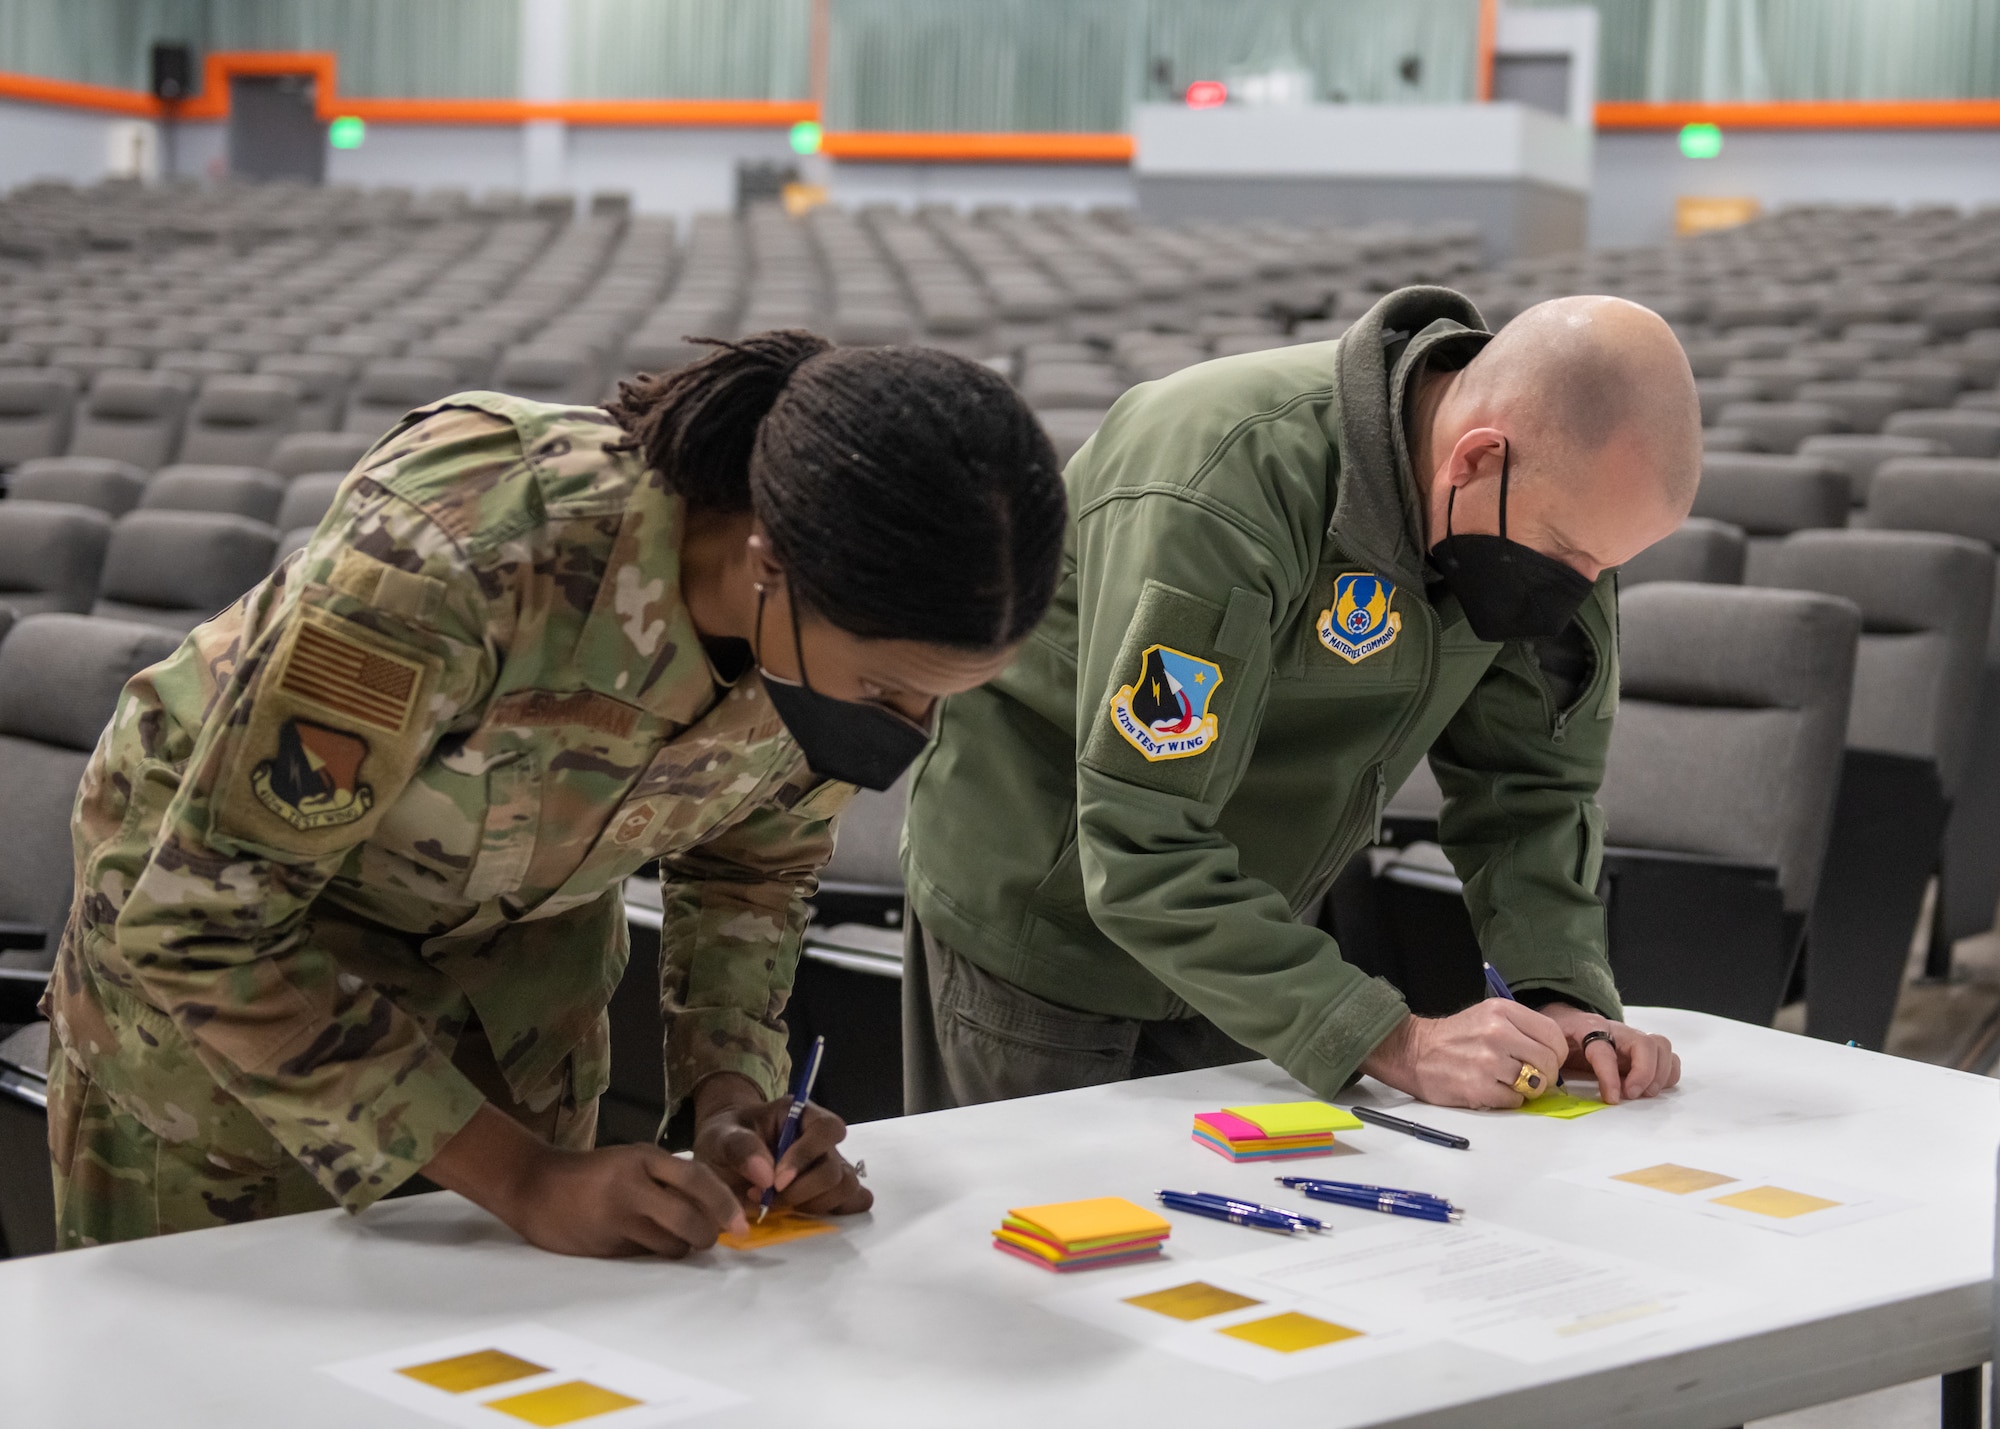 412th Test Wing Commander, Brig. Gen. Matthew Higer and 412th Test Wing Command Chief Master Sergeant Denisha Ward-Swanigan submit a COVID-19 self-test kit at the Single Point Screening Facility Test Facility (SPSTF) at the Base Theater on Edwards Air Force Base, California. The SPSTF will hold COVID-19 proactive screening tests Jan. 4-12, from 7:30 a.m. to 4 p.m. (Air Force photo by Giancarlo Casem)